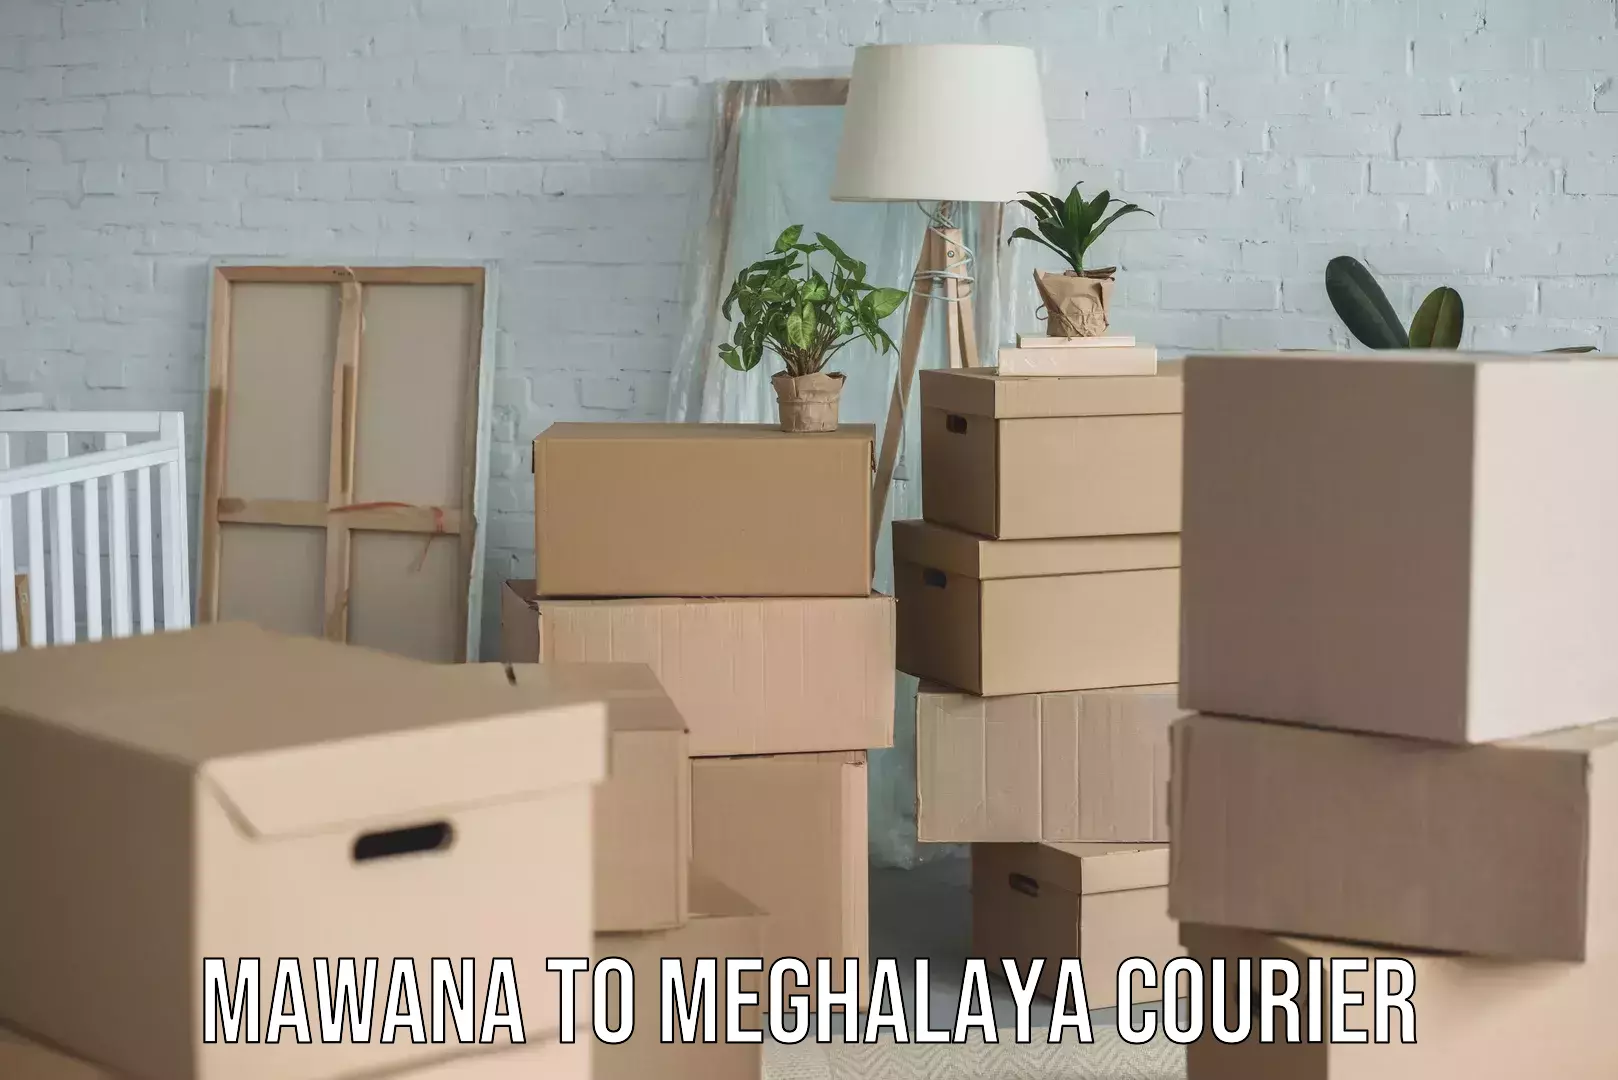 Trusted relocation experts in Mawana to Meghalaya